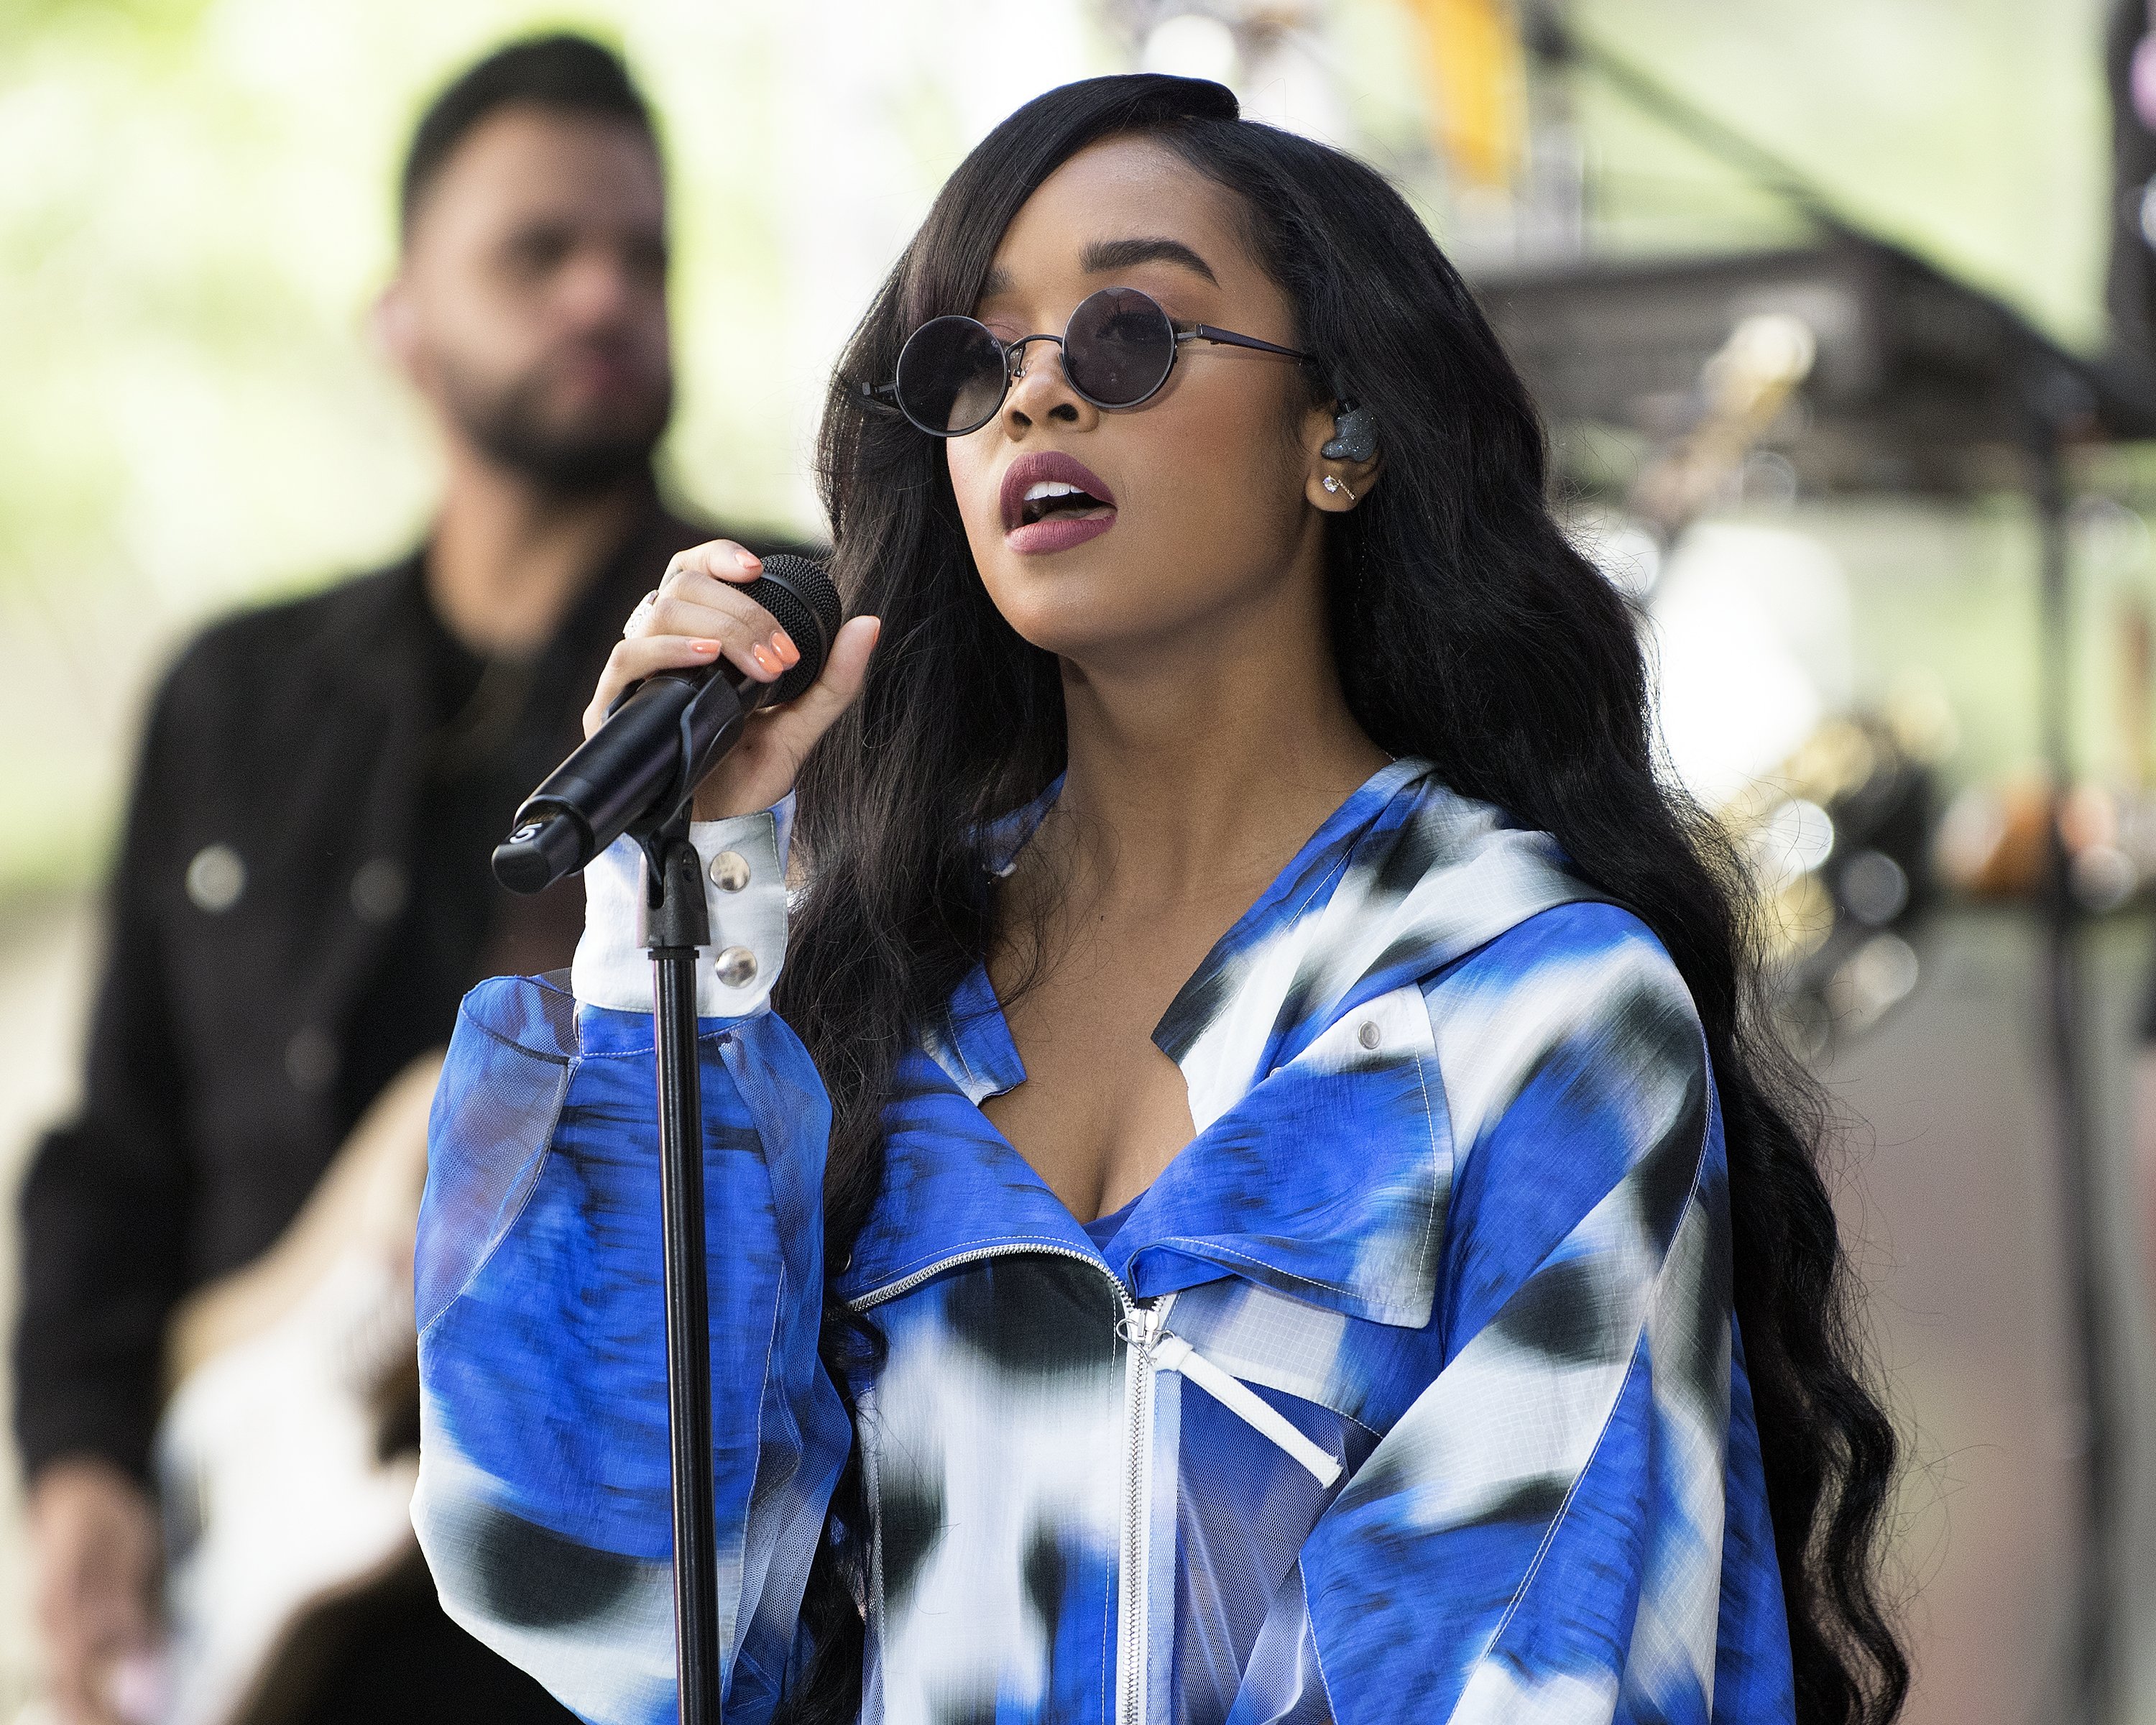  H.E.R. performing on the Today Show at Rockefeller Plaza in New York City | Photo: Debra L Rothenberg/Getty Images